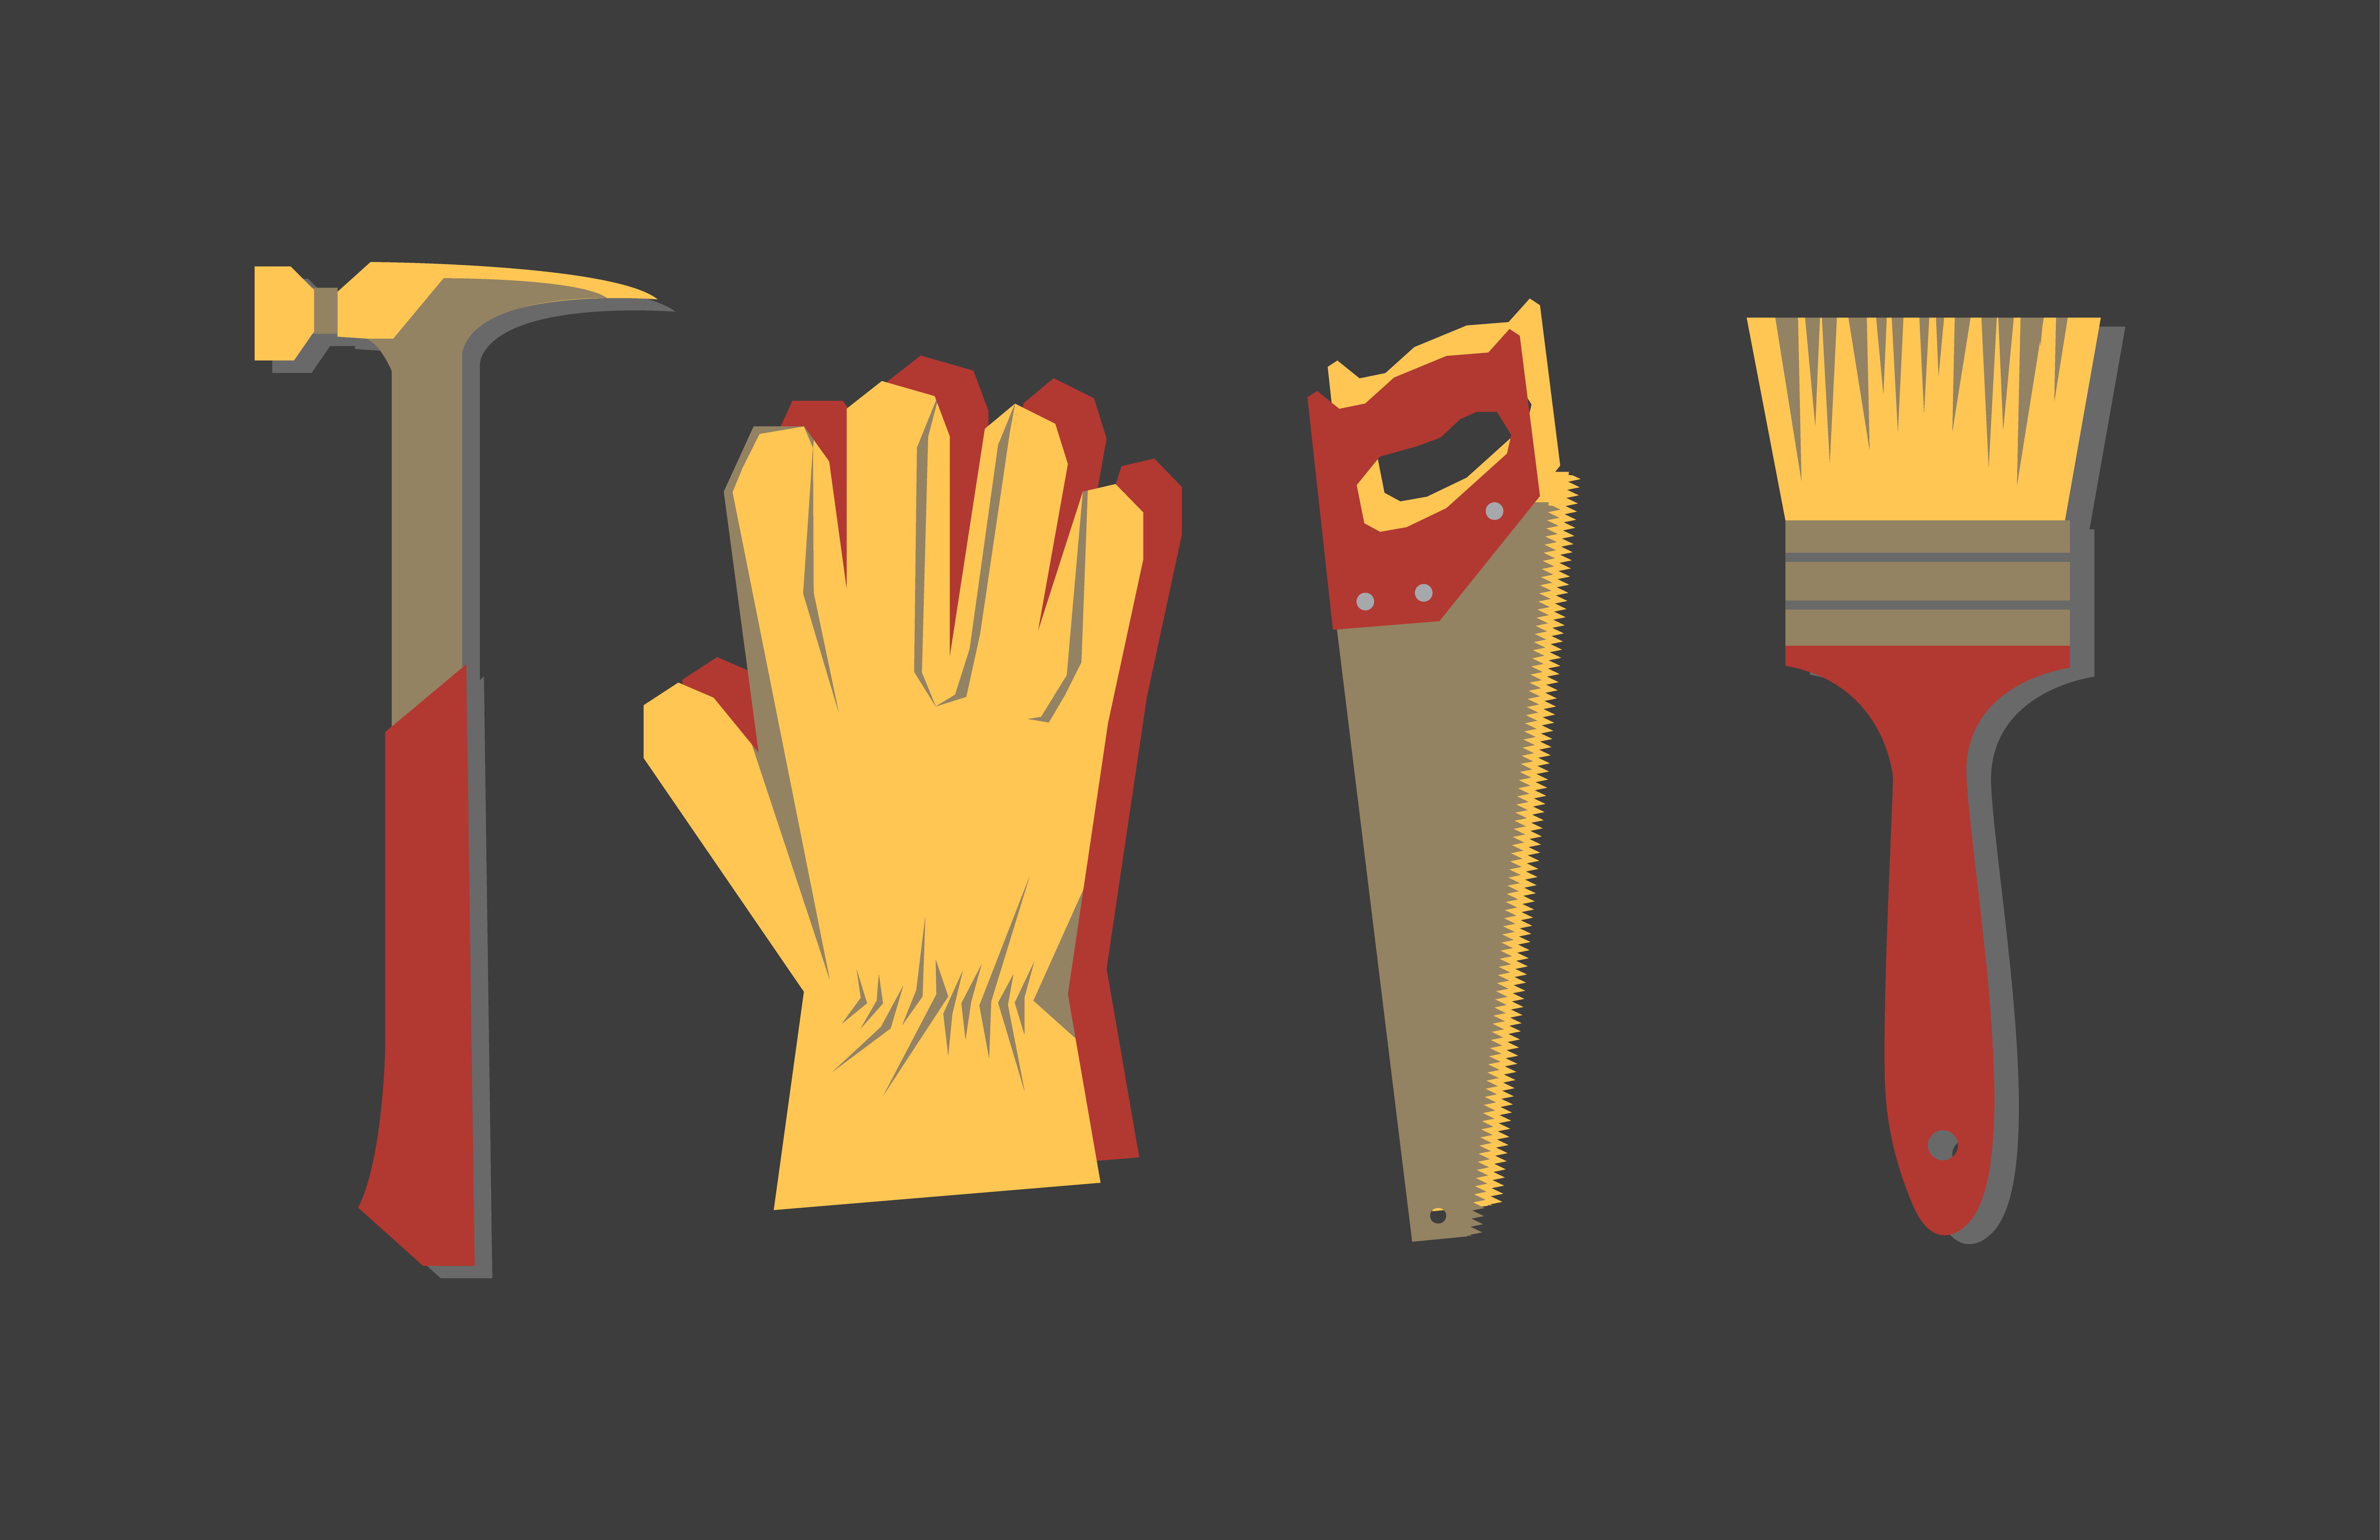 A graphic of a hammer, glove, saw and paintbrush